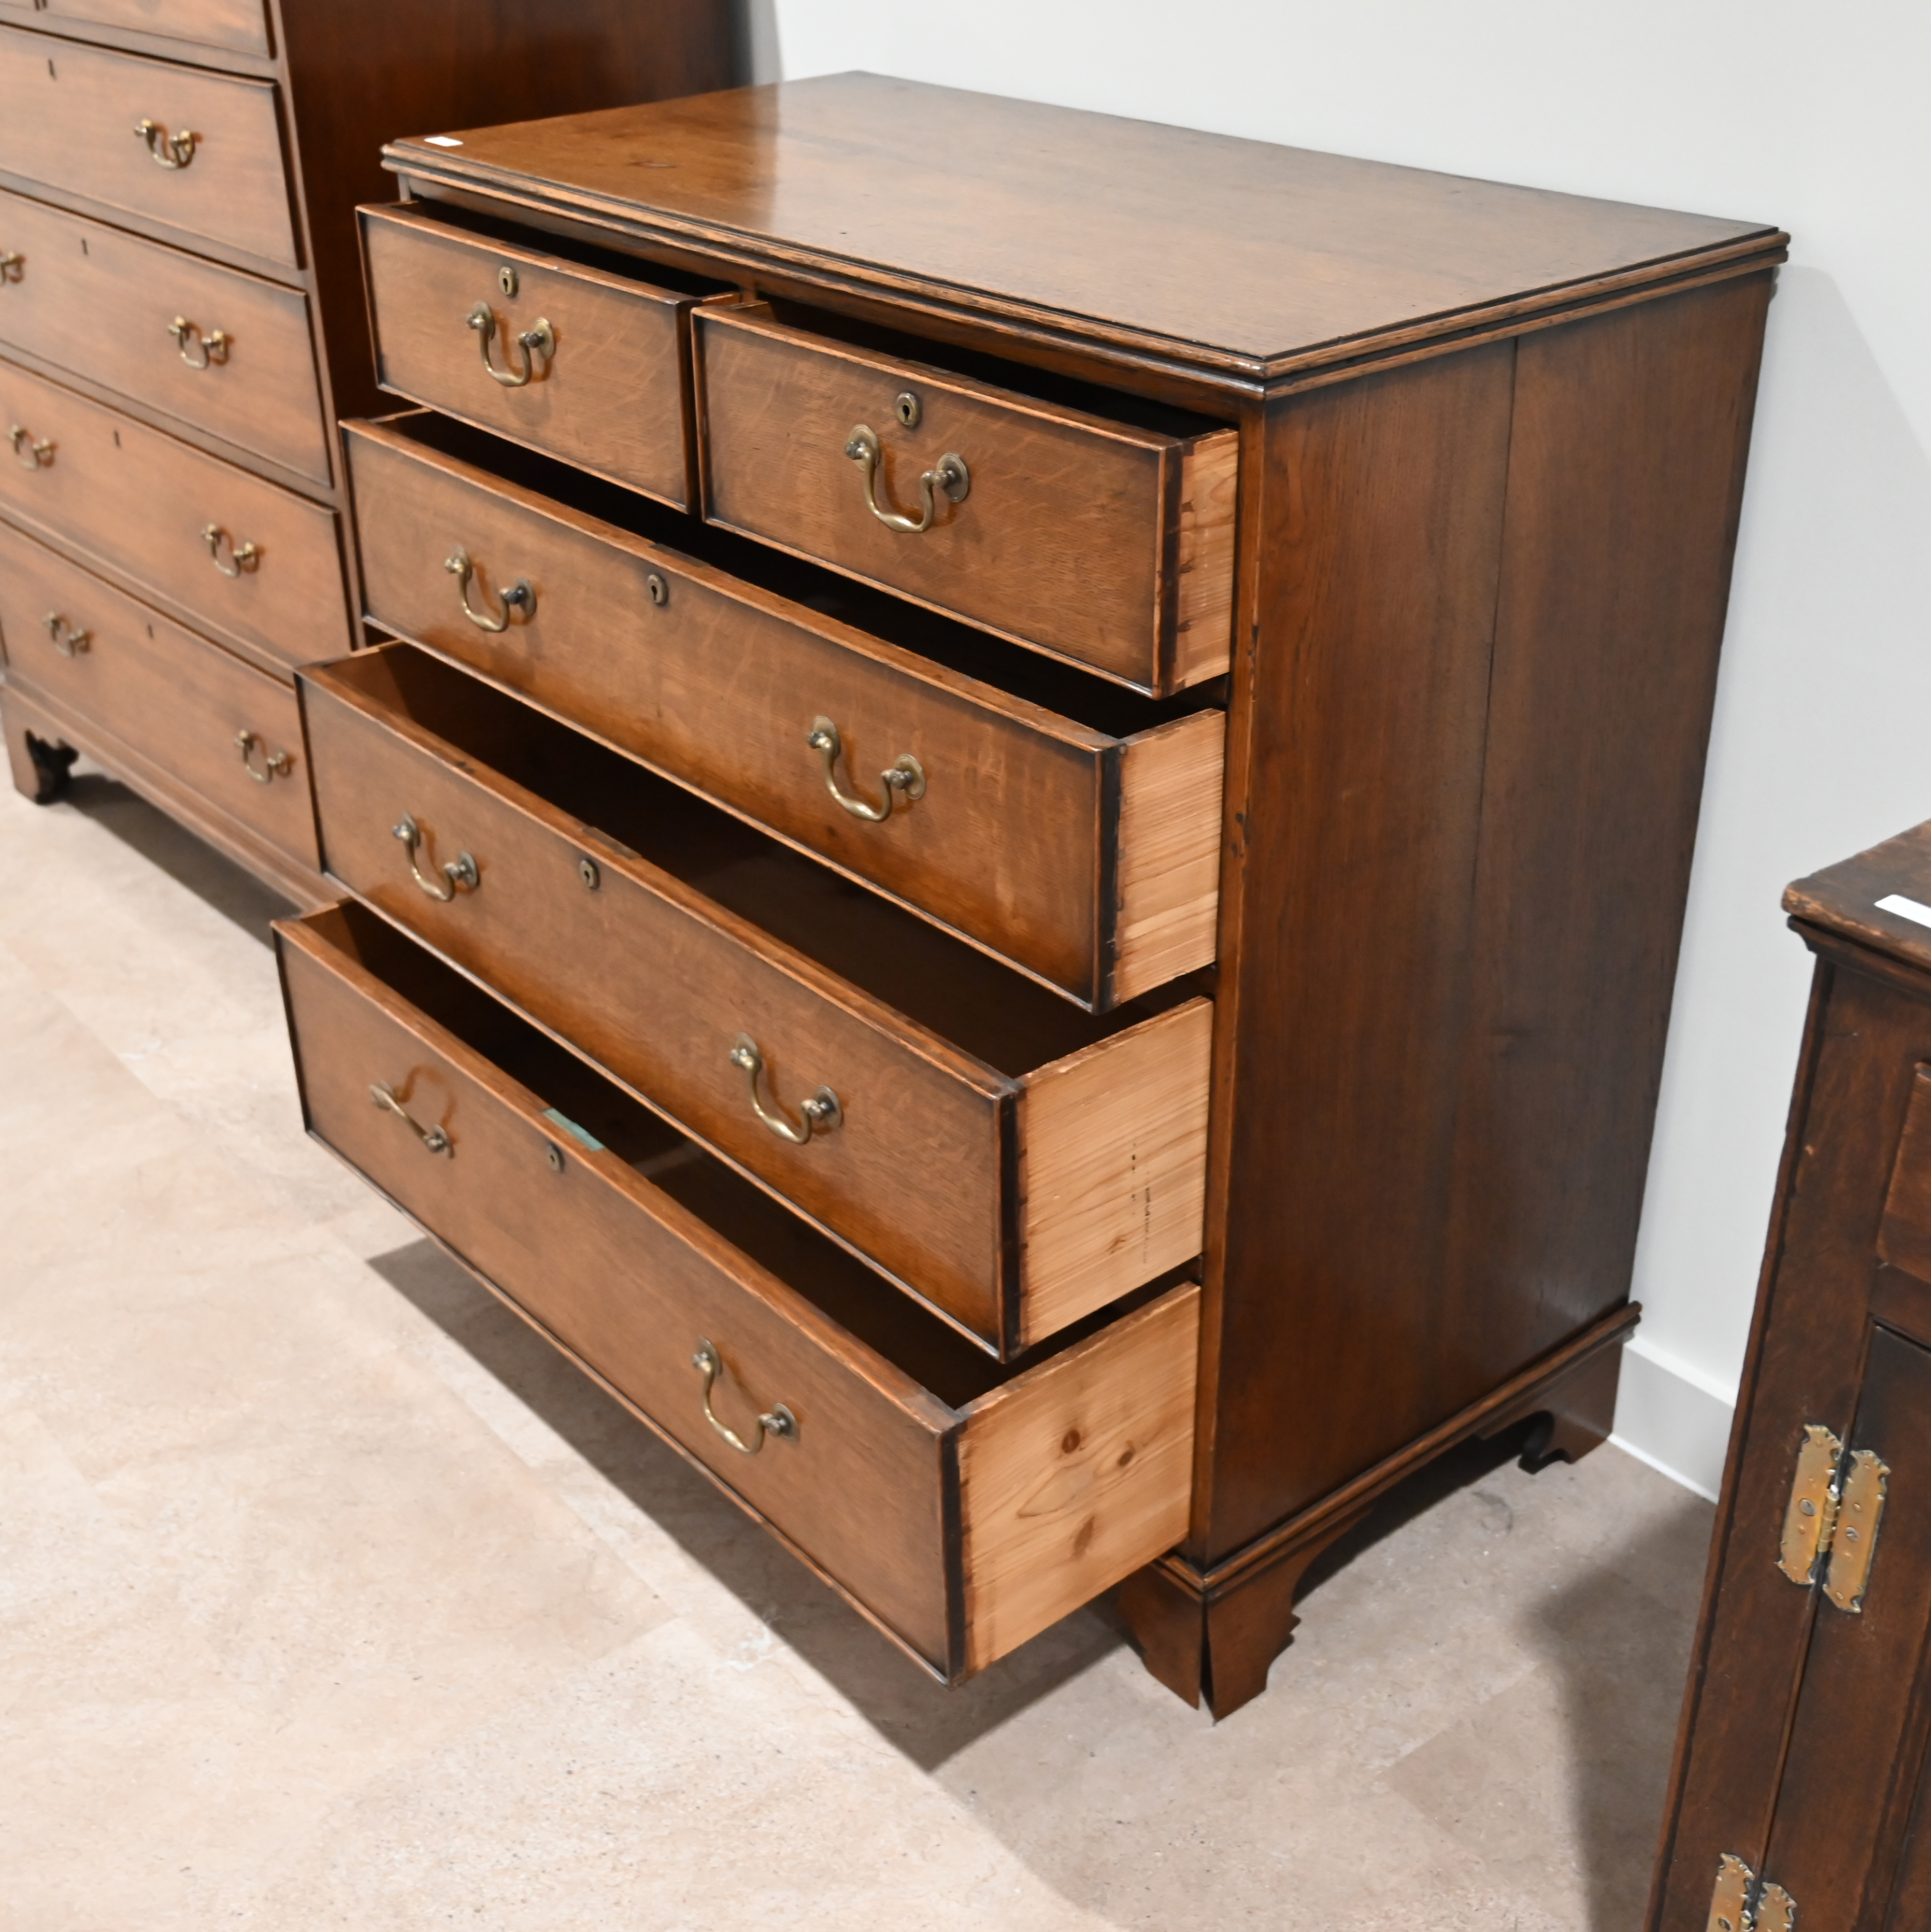 A late Georgian Oak chest of 2 over 3 drawers with brass handles. W 100cm, D 51cm, H 102cm. (C) - Image 3 of 3